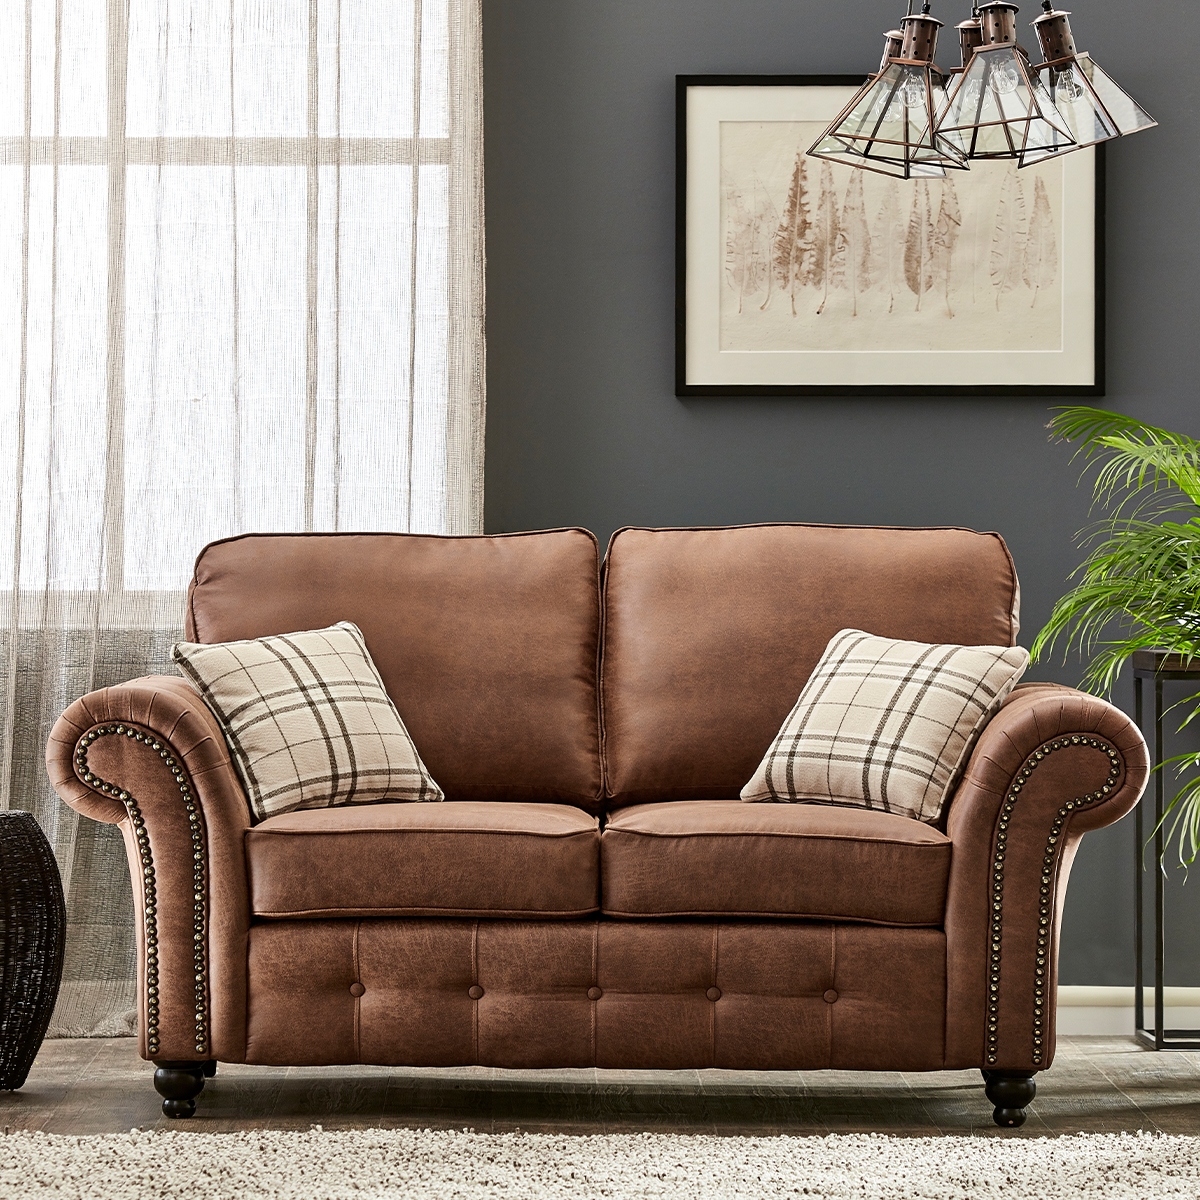 Oakland Leather 2 Seater Sofa – Tan Brown – The Online Sofa Shop